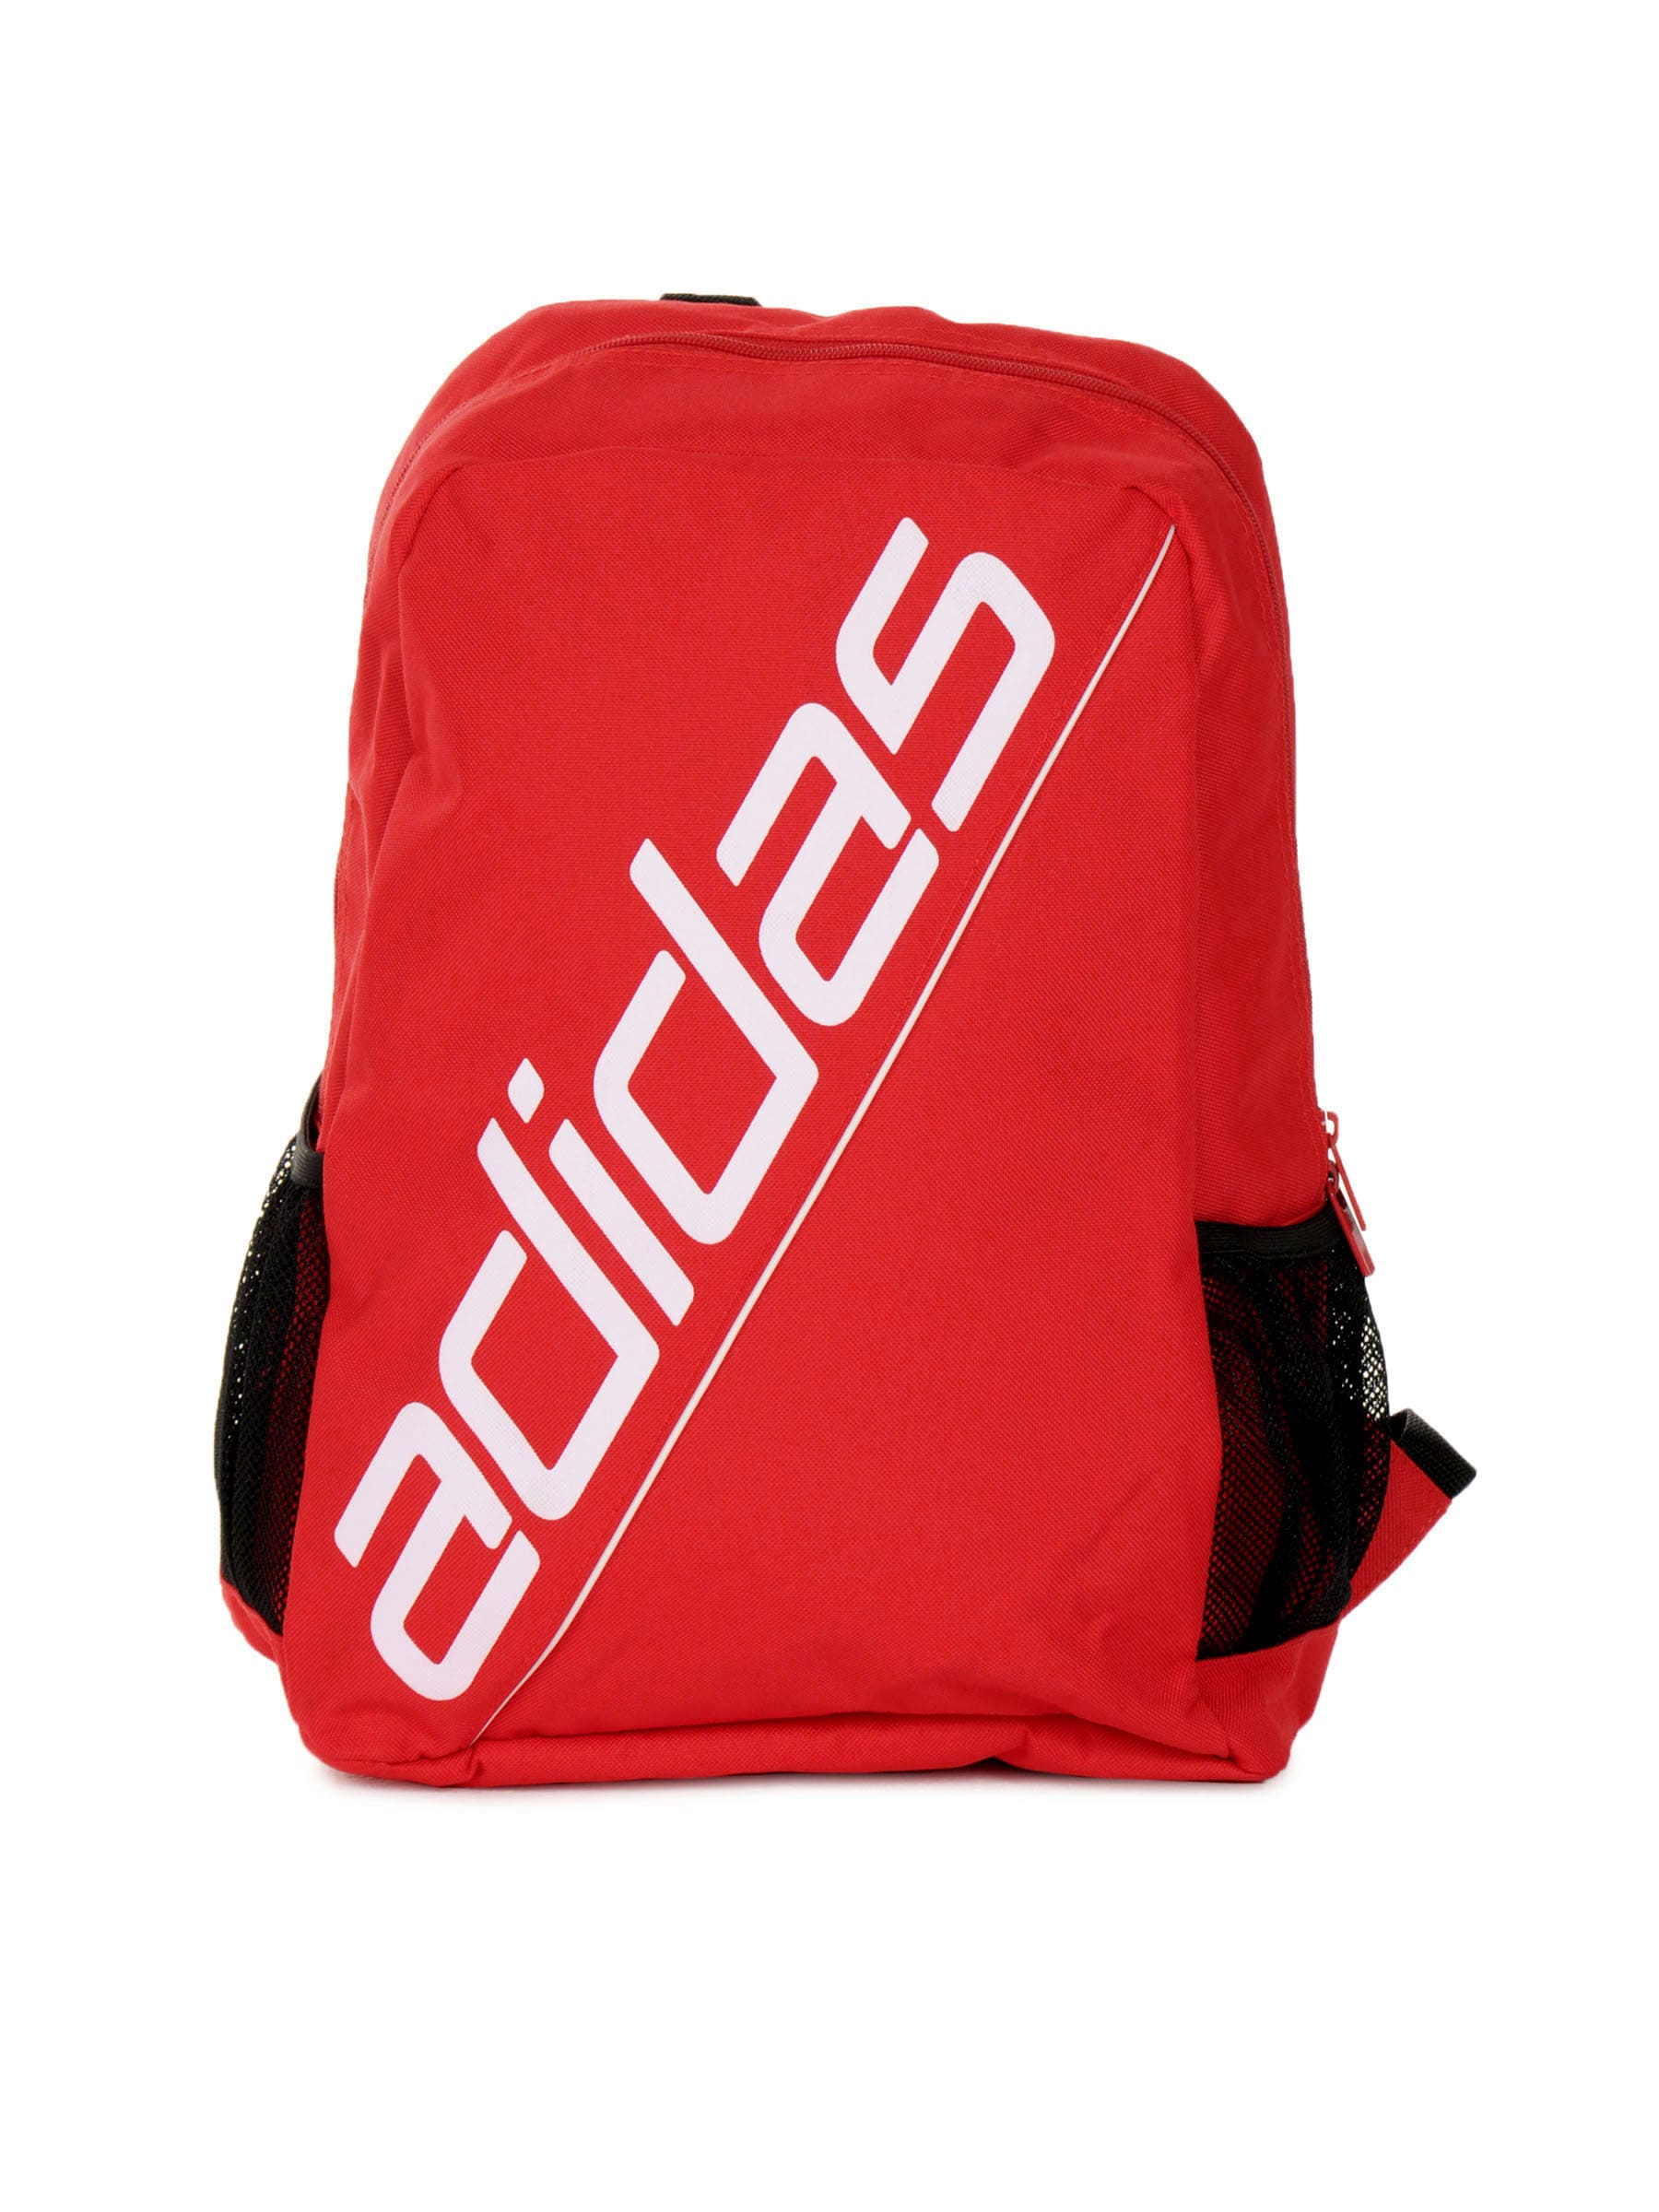 ADIDAS Unisex Ess Red Backpack